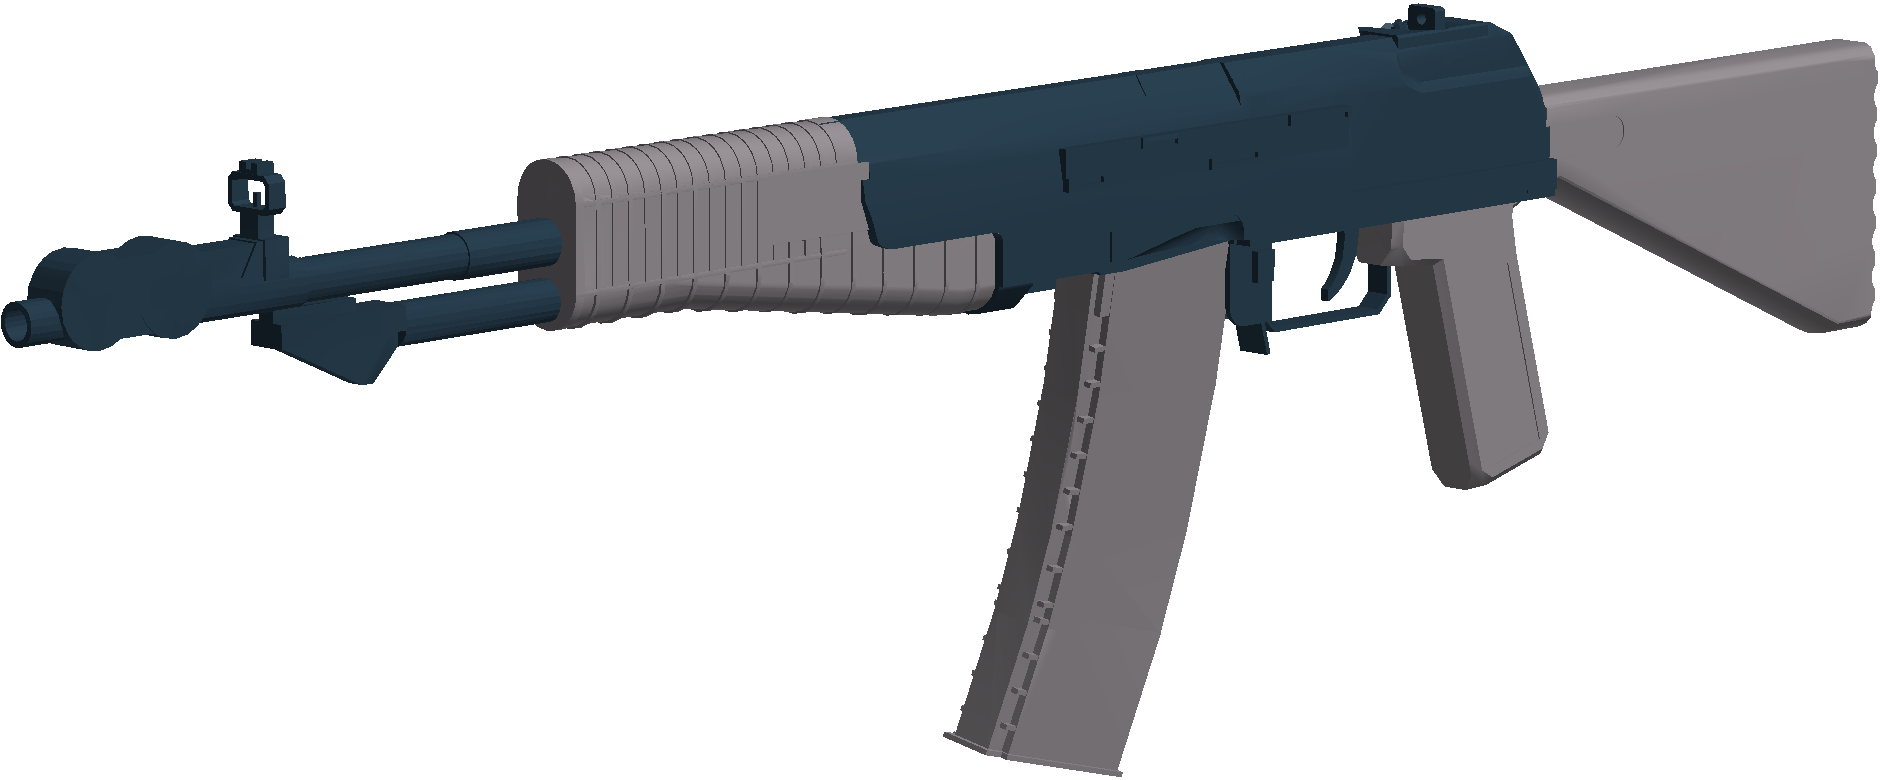 An 94 Phantom Forces Wiki Fandom Powered By Wikia - roblox phantom forces canted iron sight